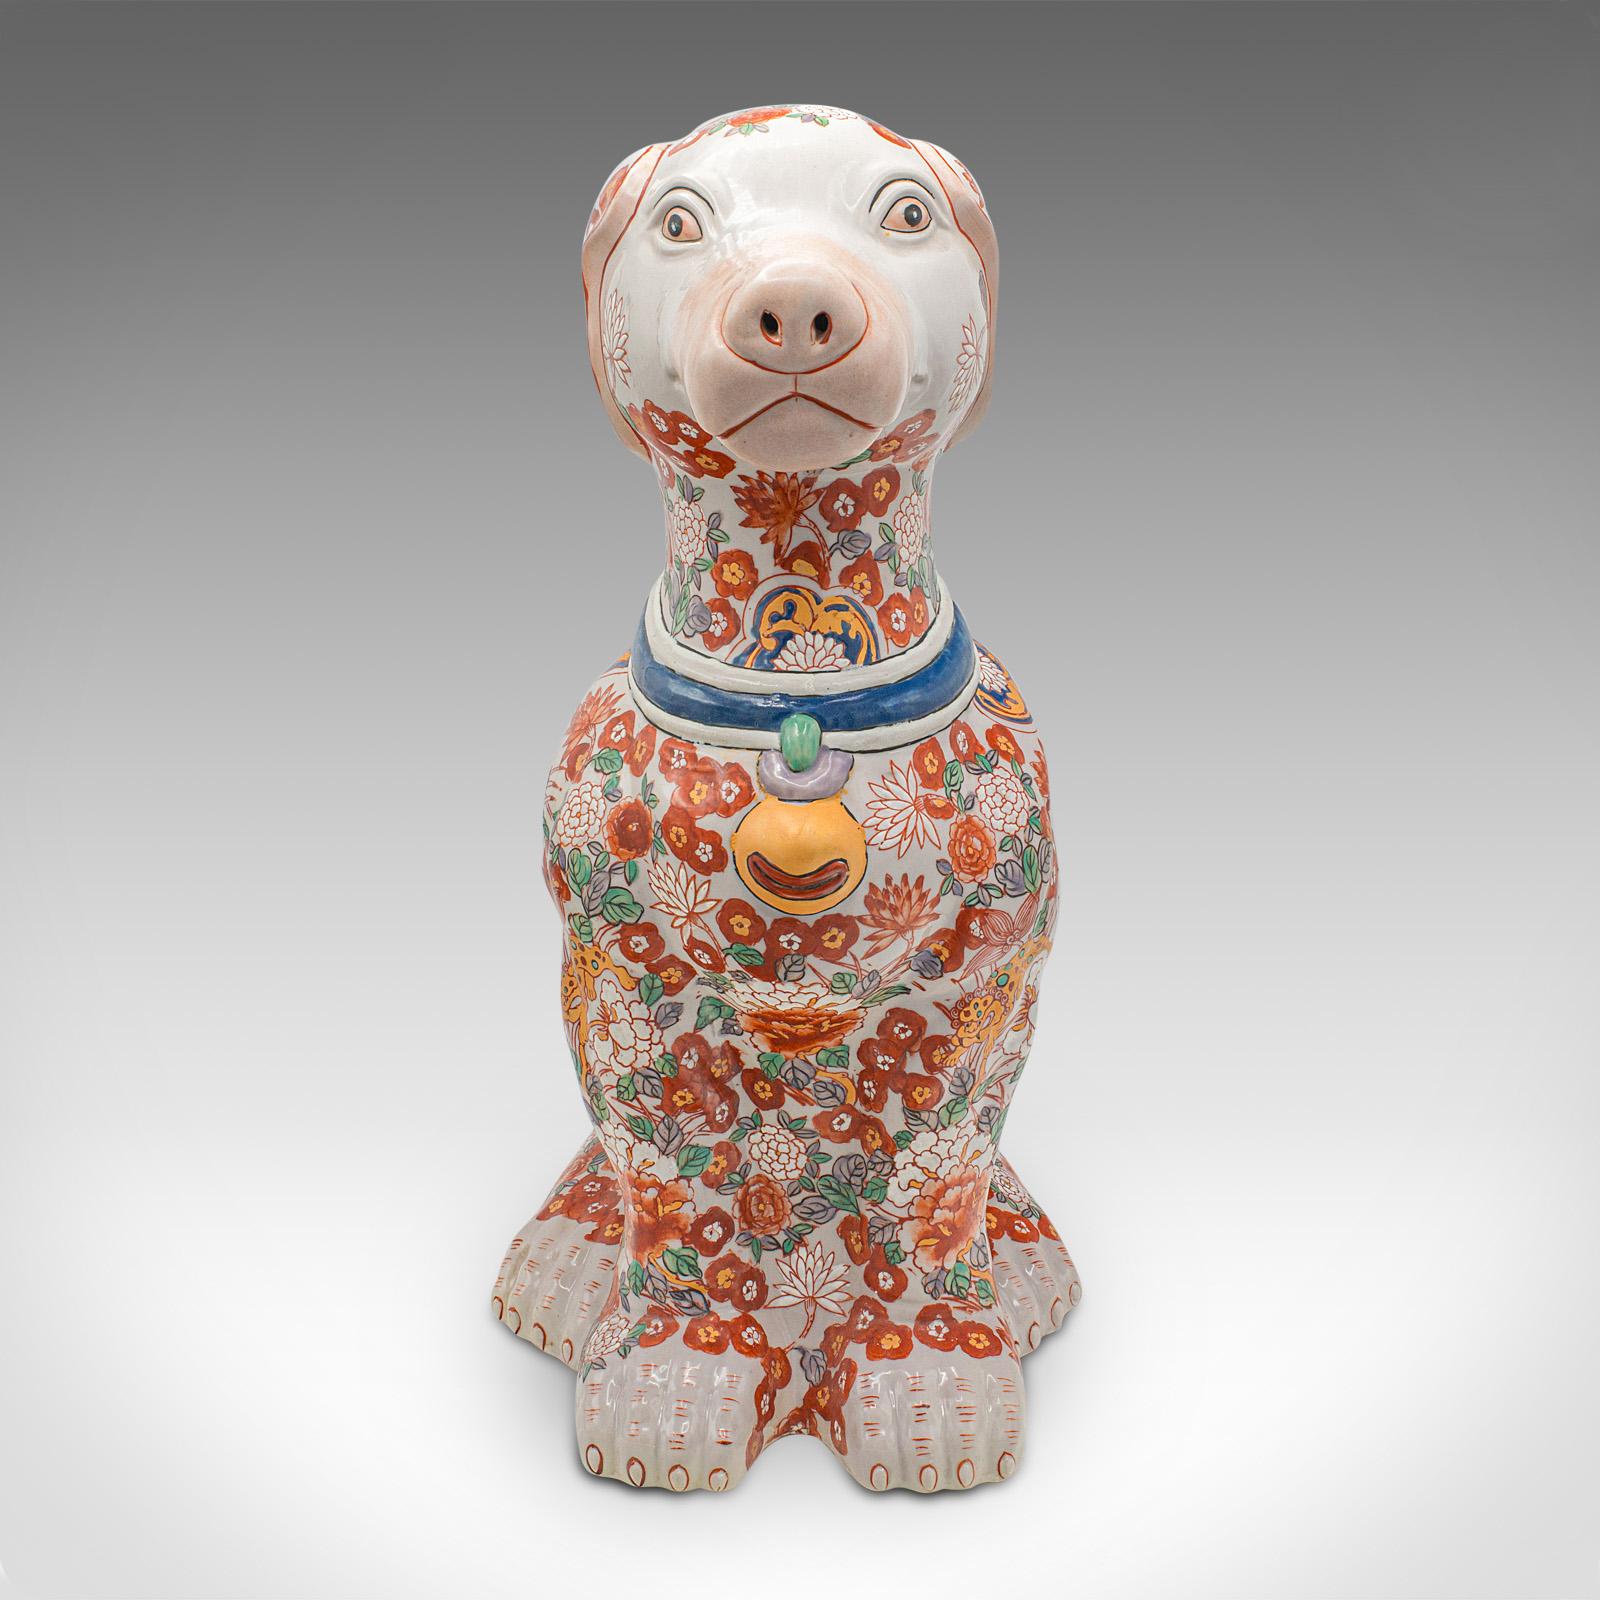 This is a large vintage decorative dog figure. A Chinese, ceramic hound statue in Imari taste, dating to the mid 20th century, circa 1950.

Of superb decorative proportion, a faithful friend for the fireside
Displays a desirable aged patina and in